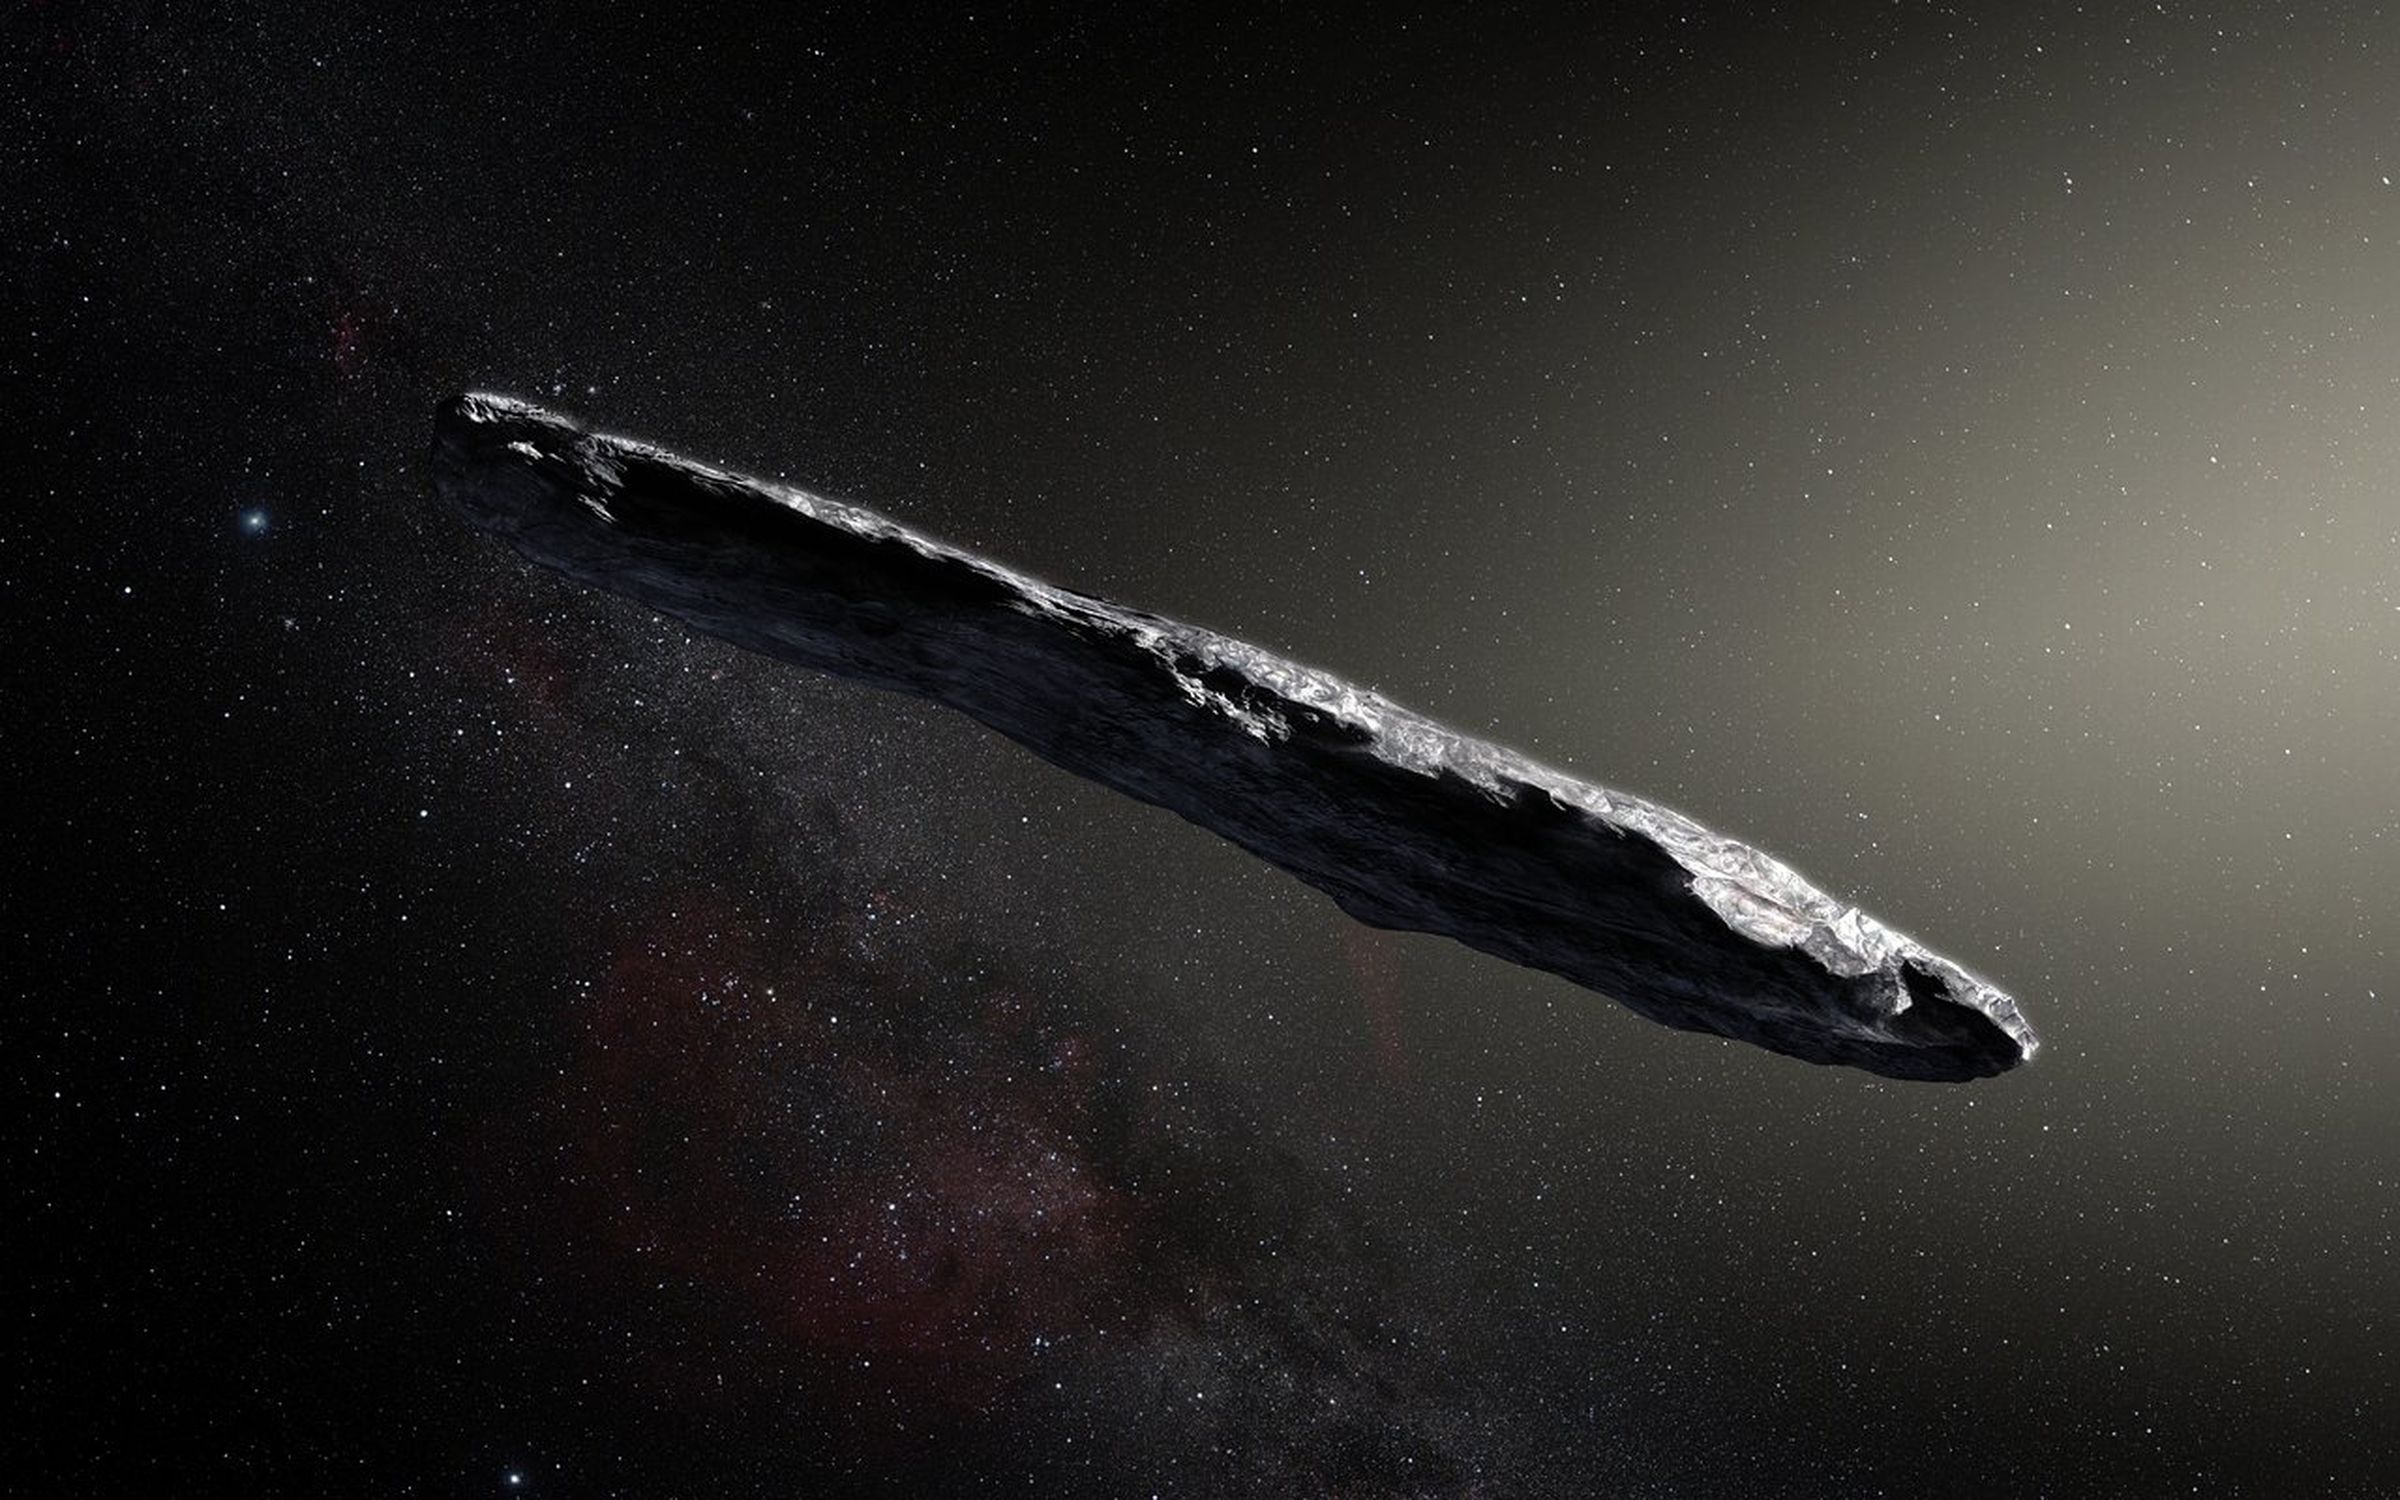 An artistic rendering of `Oumuamua, the first interstellar rock discovered.